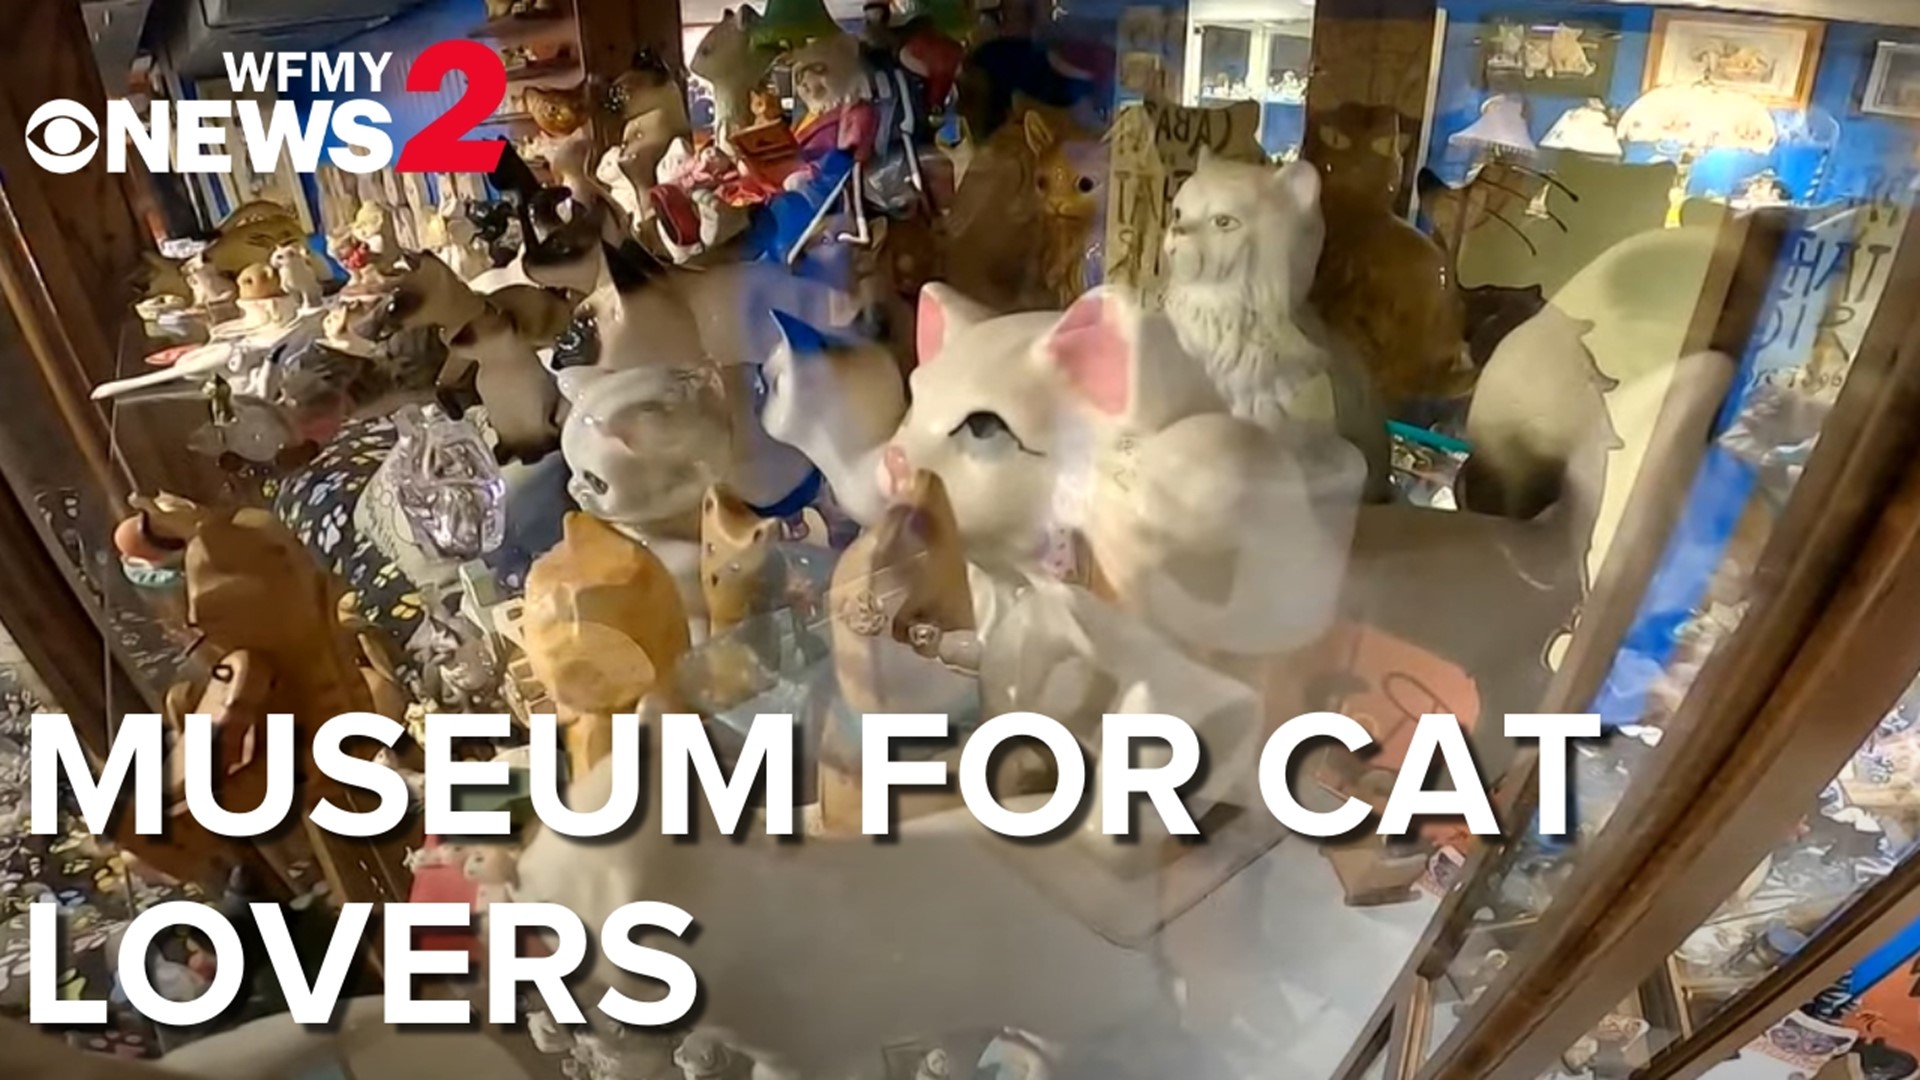 It’s a museum entirely dedicated to cats!